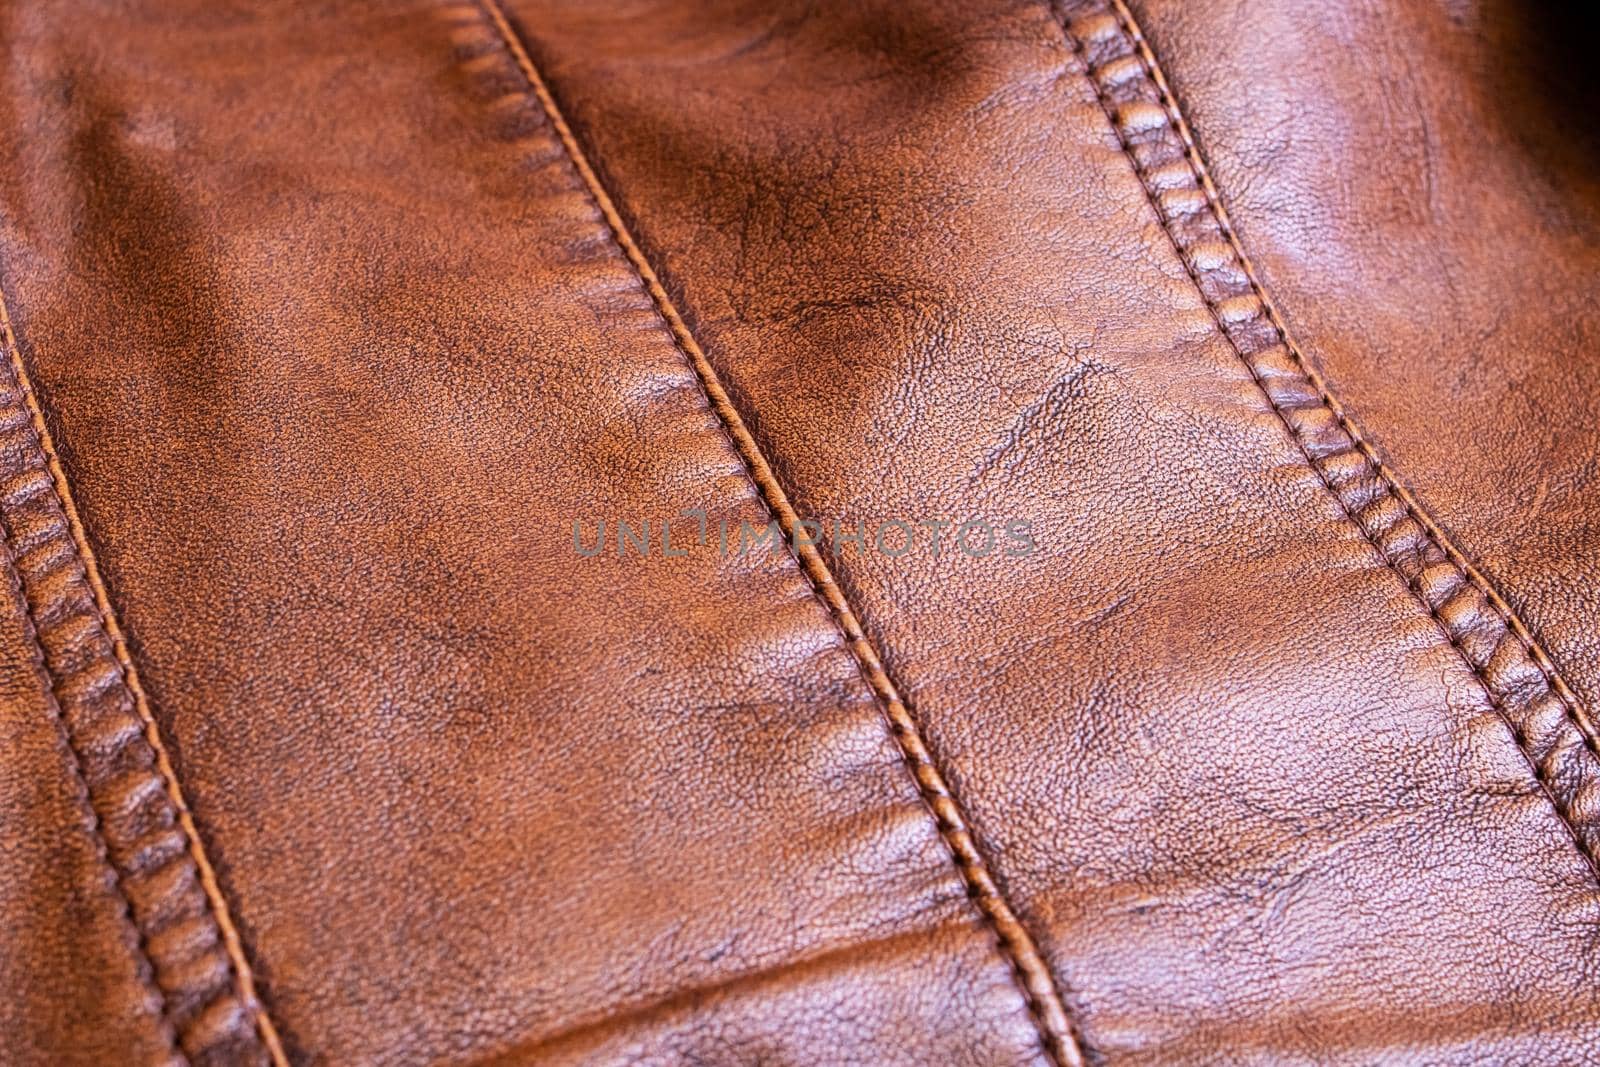 Seams on a brown leather product close up by Vera1703